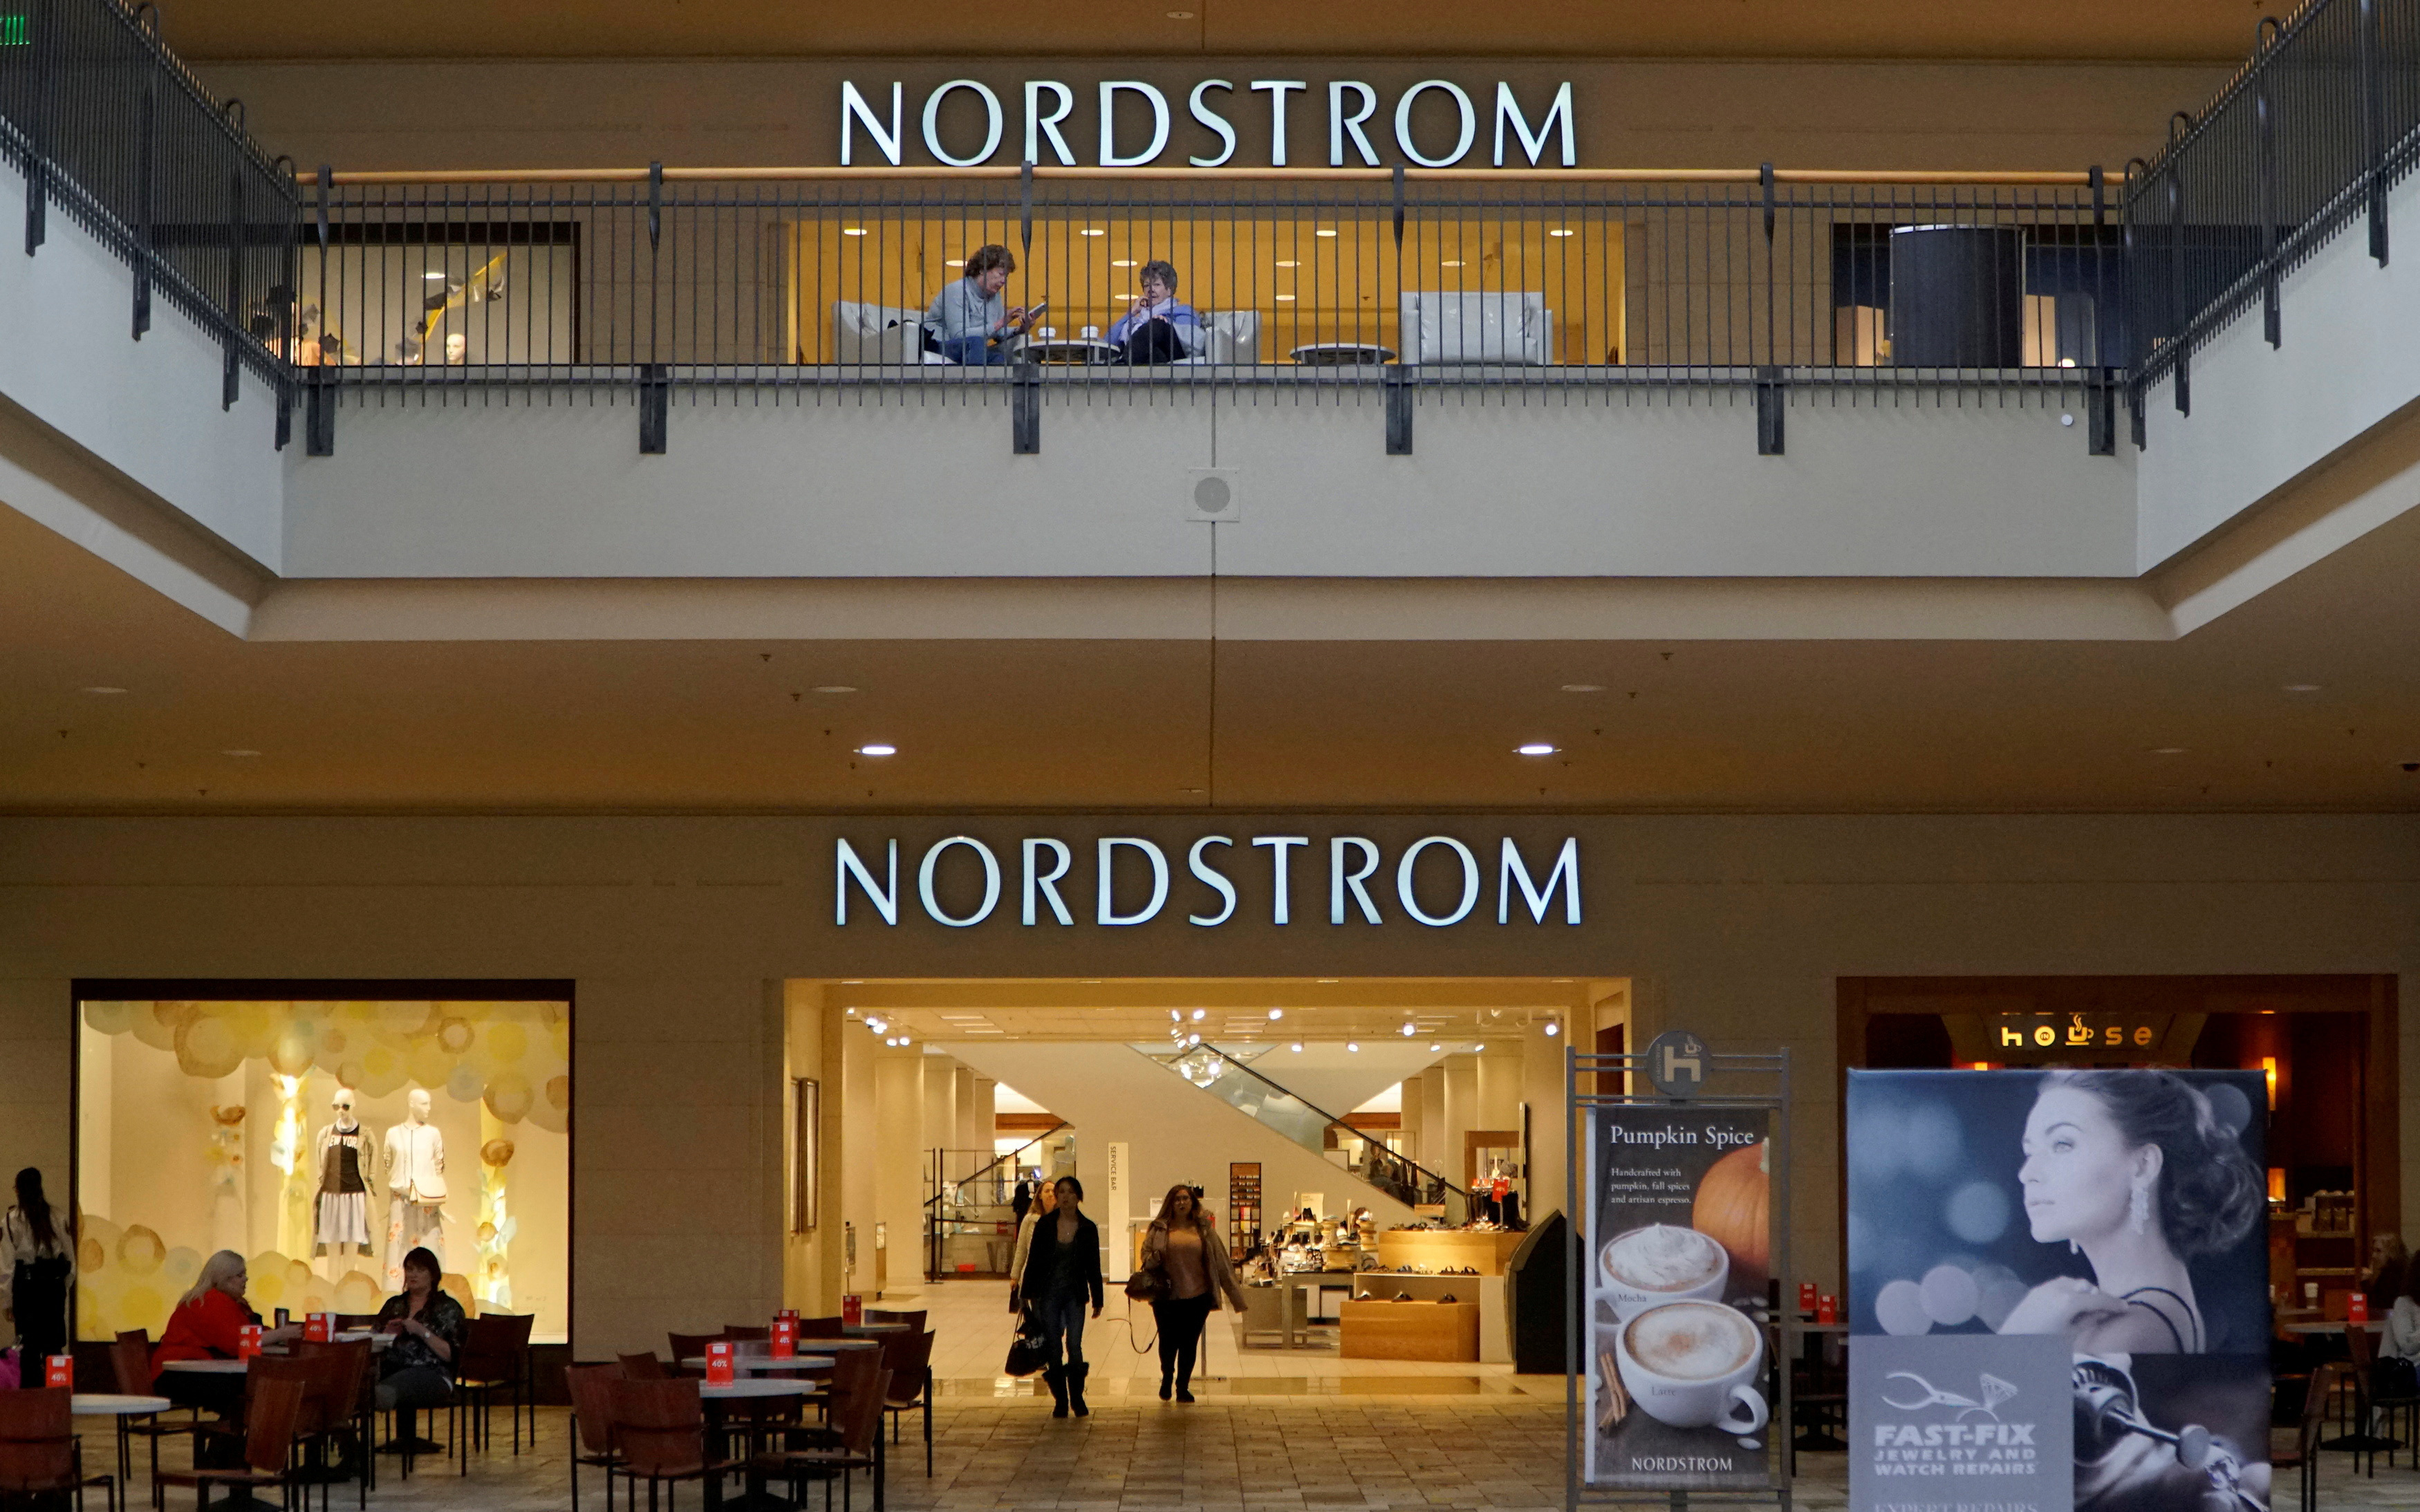 Nordstrom shares soar on reports founding family is again trying to take  retailer private By Proactive Investors